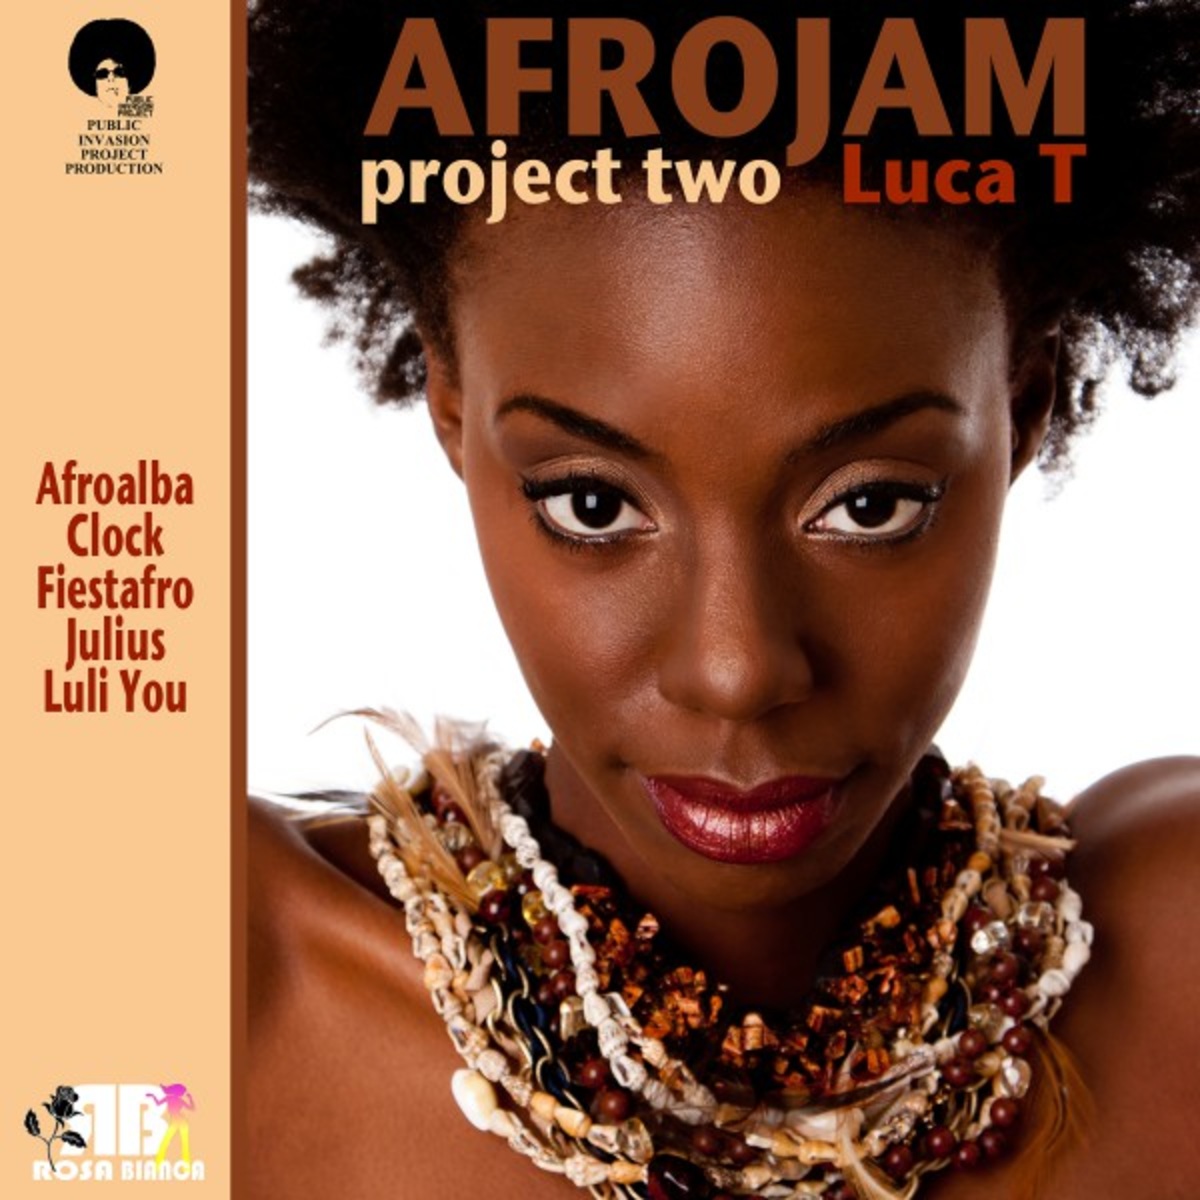 Luca T - Afrojam (Project Two) / Rosa Bianca Label